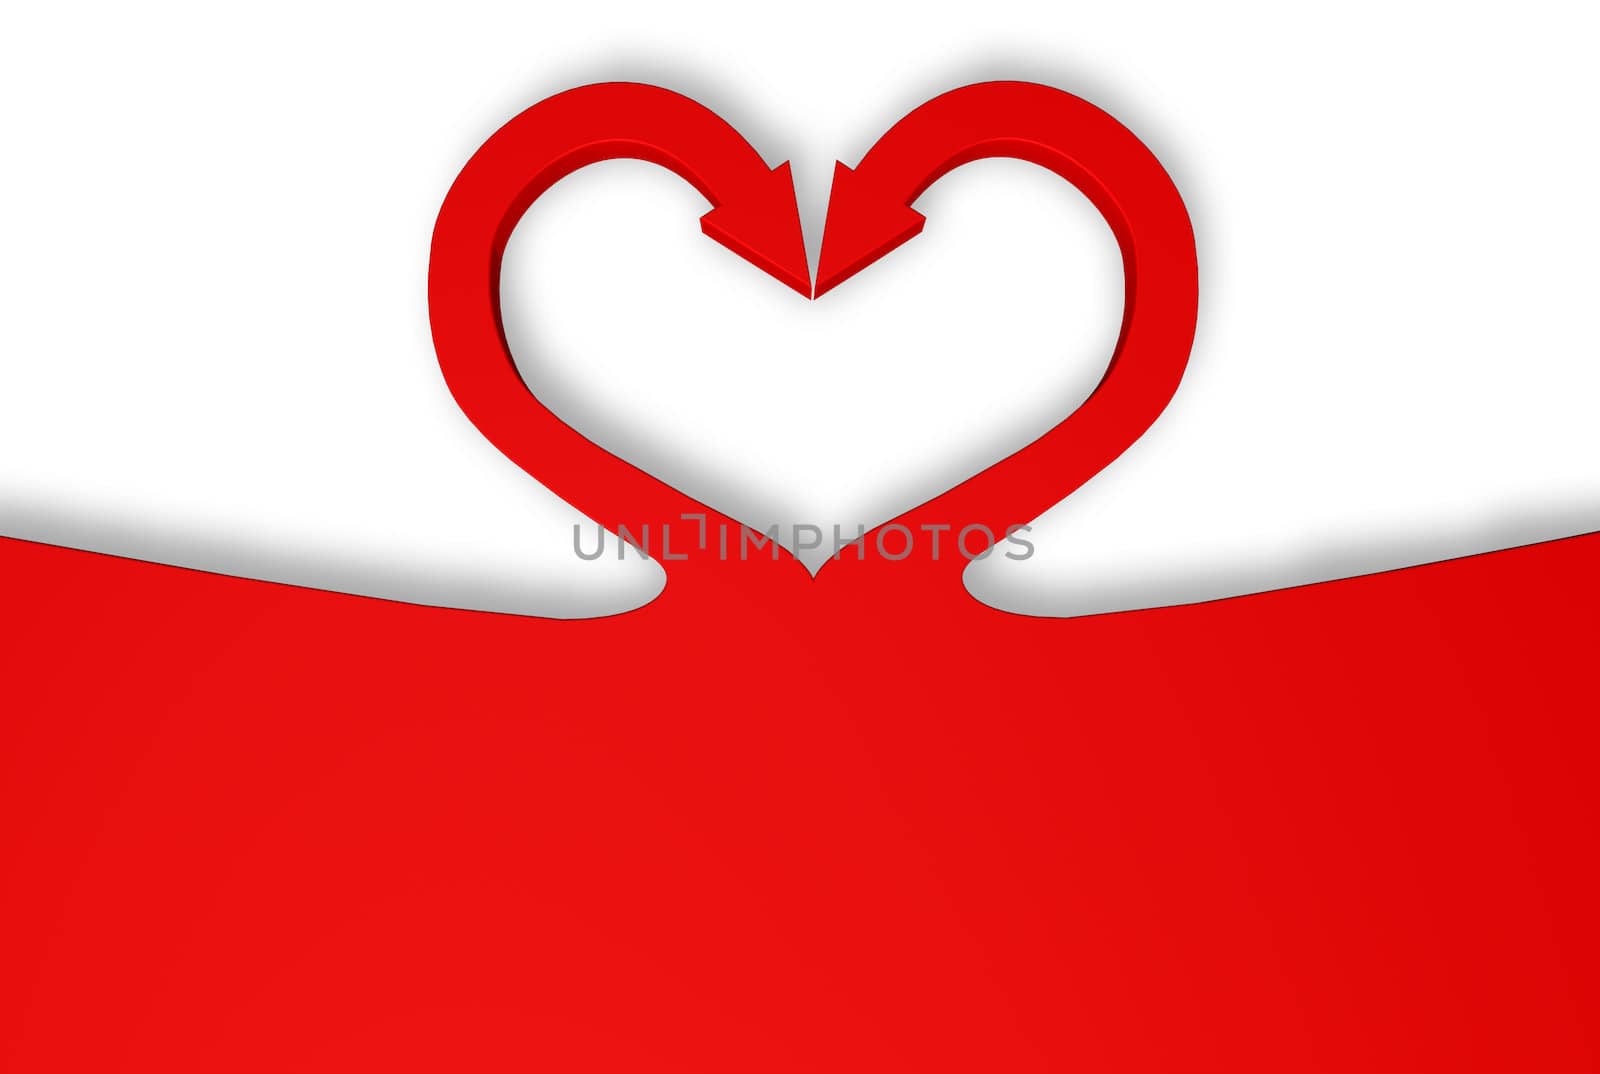 heart symbol from two red arrows - 3d illustration